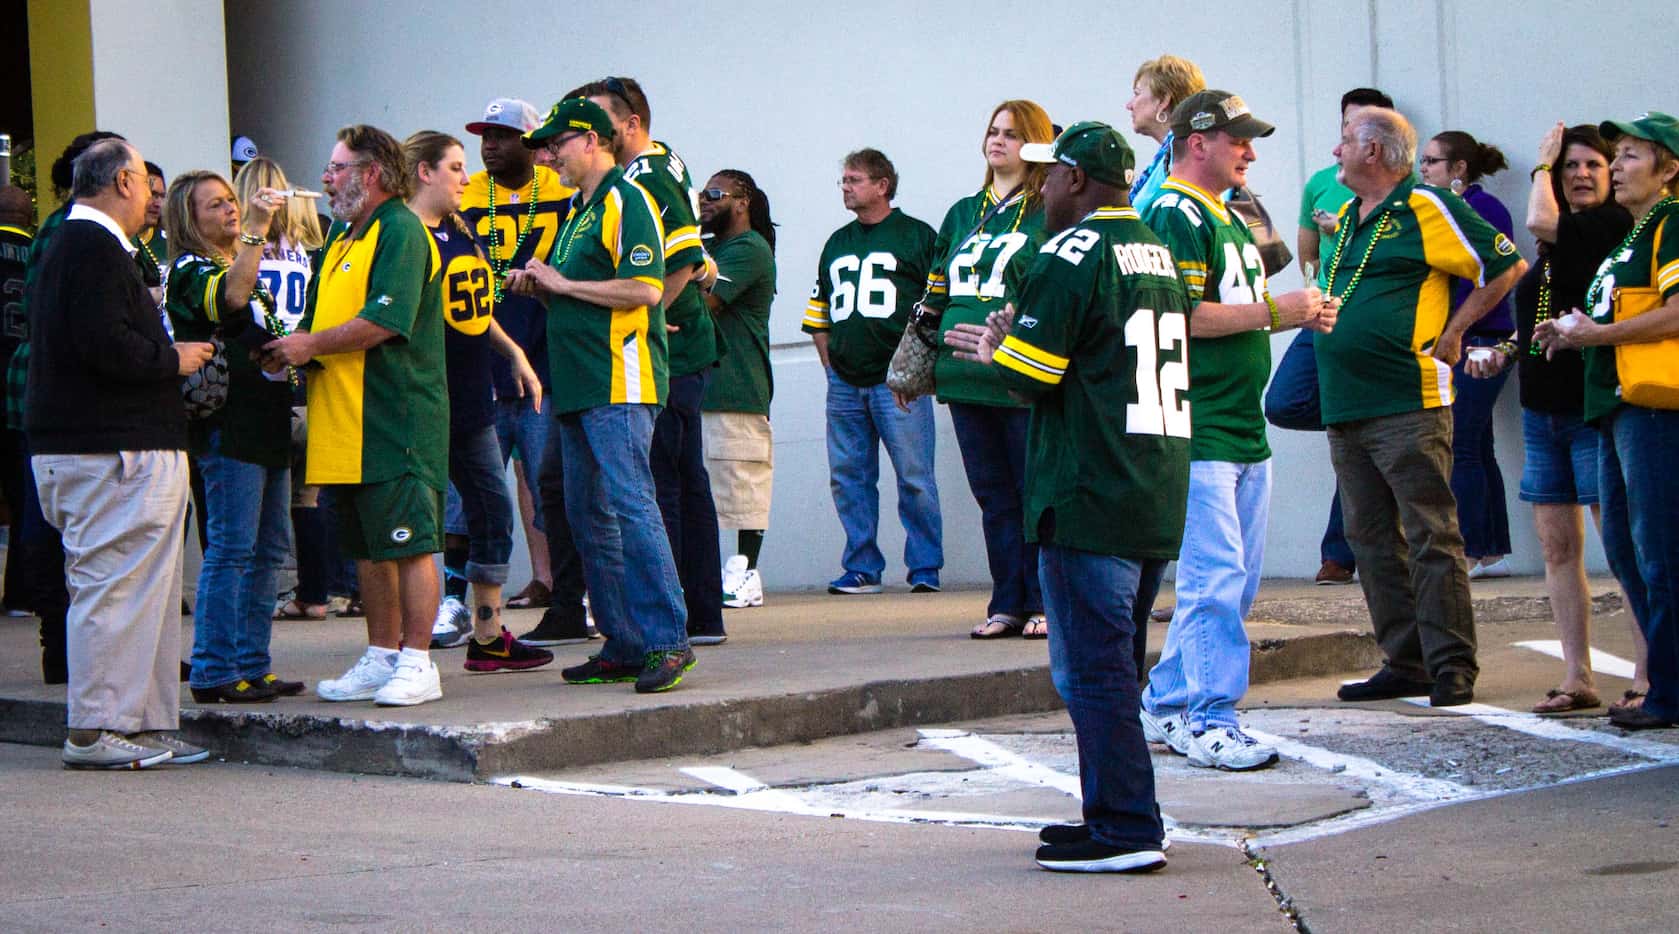 Green Bay Packers fans stretch their legs during halftime at Vernon's Gastropub in Addison.